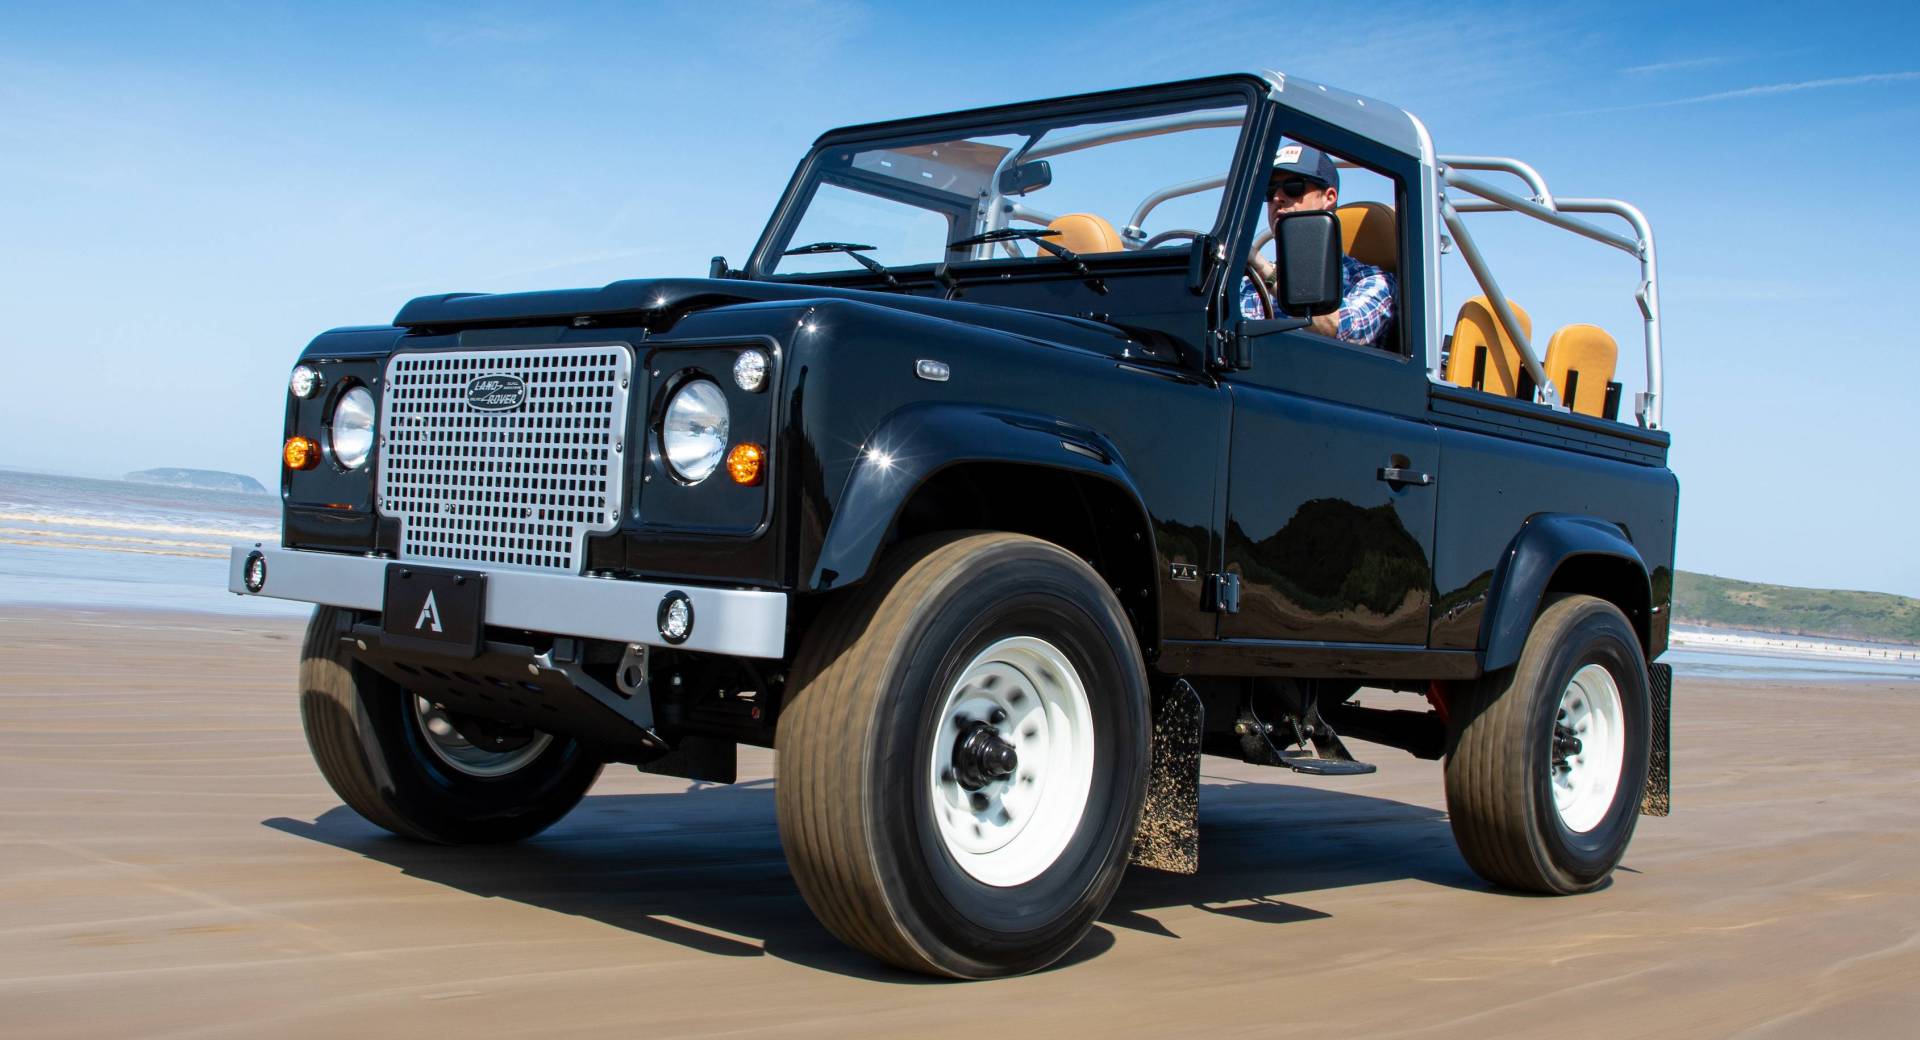 1989 Land Rover Defender 90 "So-Cal" Restomod Is How Someone Spent